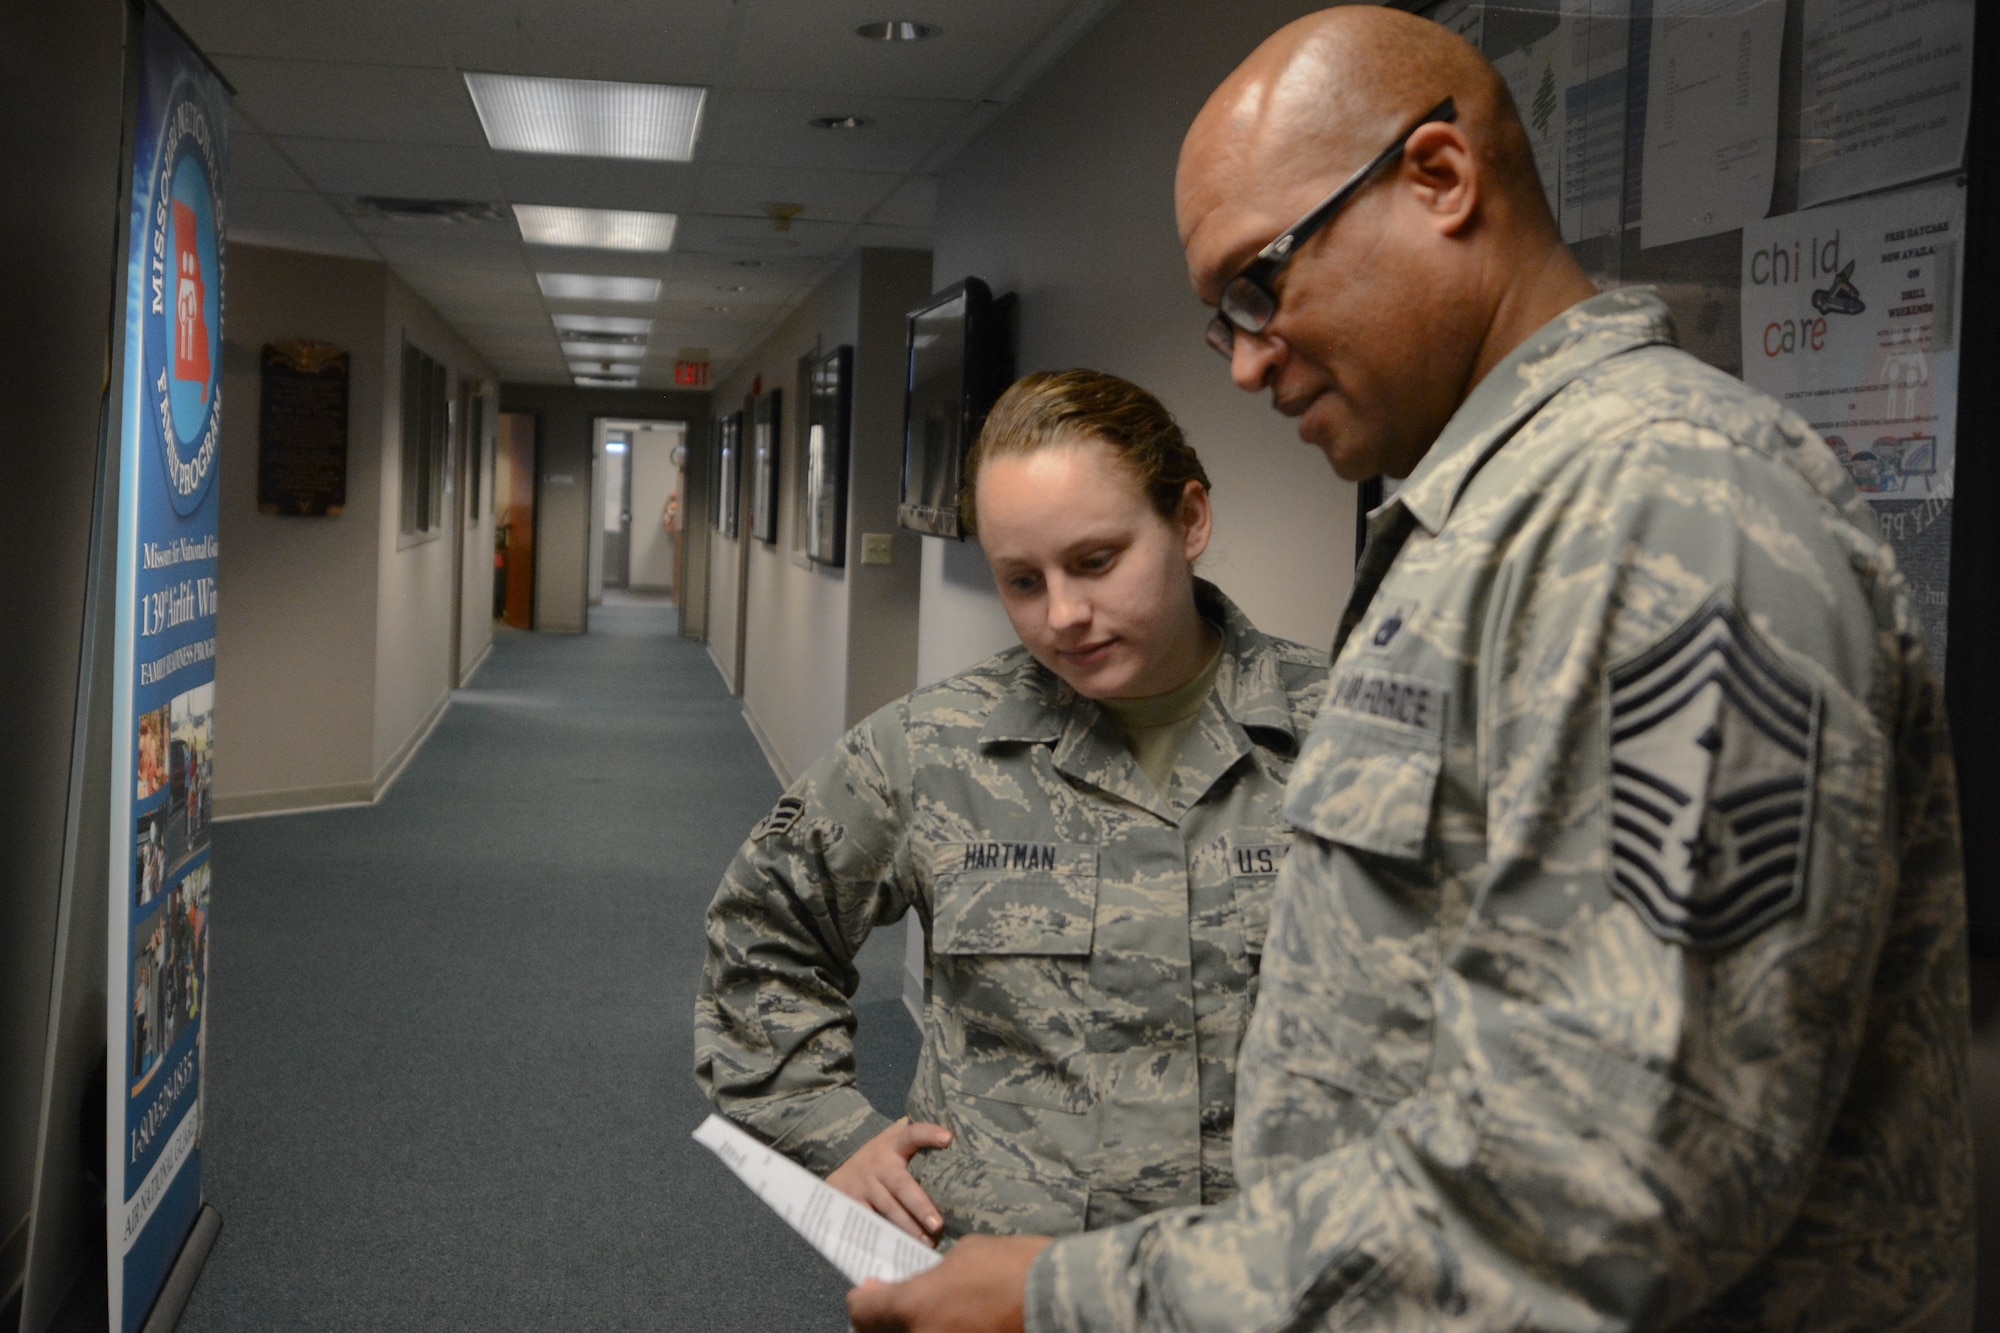 Chief Master Sgt. Joseph Hamlett, first seargent assigned to the 139th Airlif Wing, discusses the key factors in leadership with an airman at Rosecrans Air National Guard Base on Nov. 17, 2015. (U.S. Air National Guard photo by Senior Airman Bruce Jenkins)